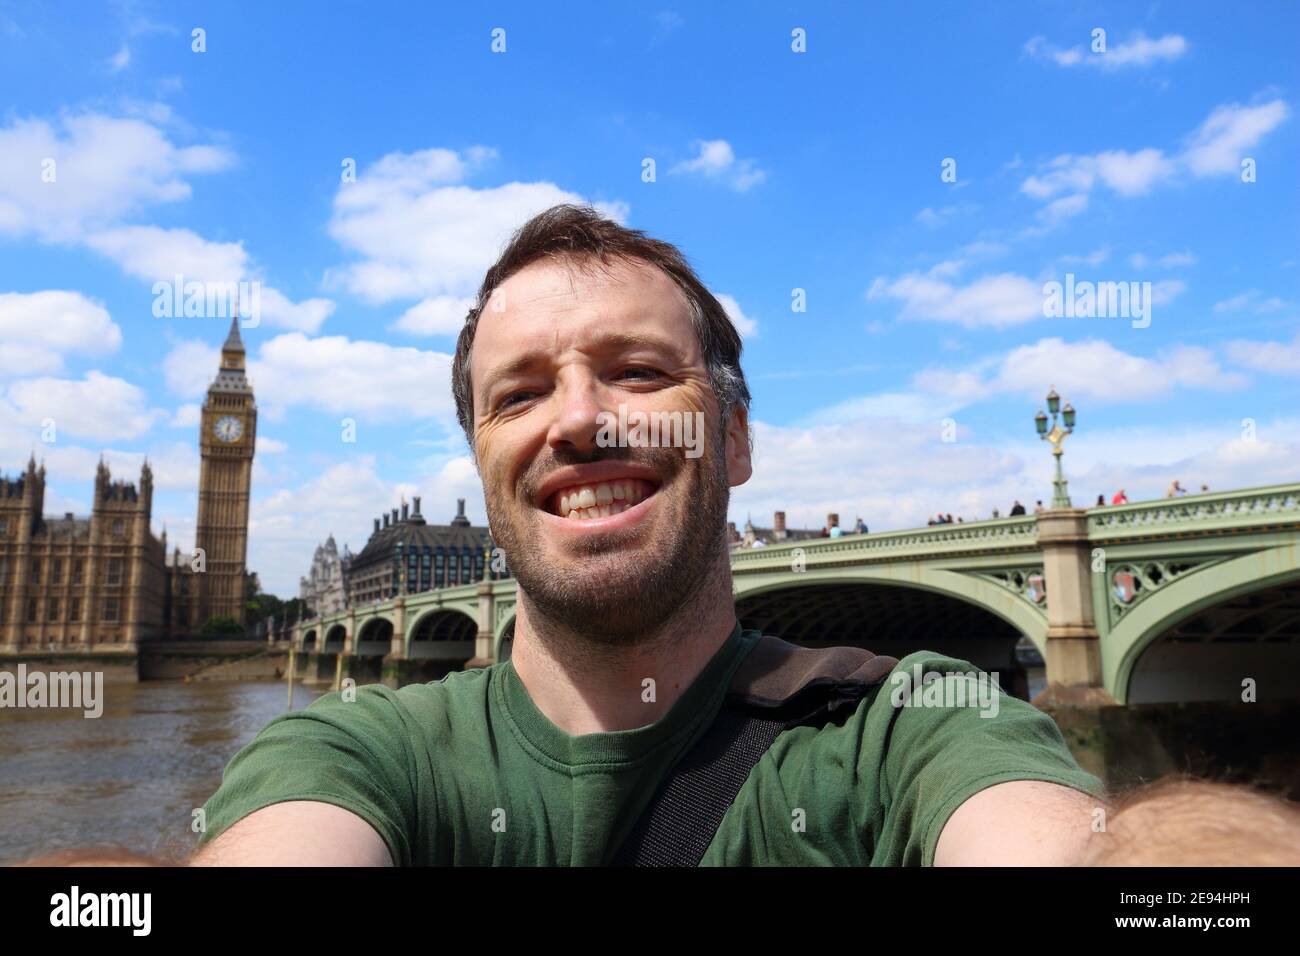 Selfie with London UK parliament and Big Ben. Stock Photo